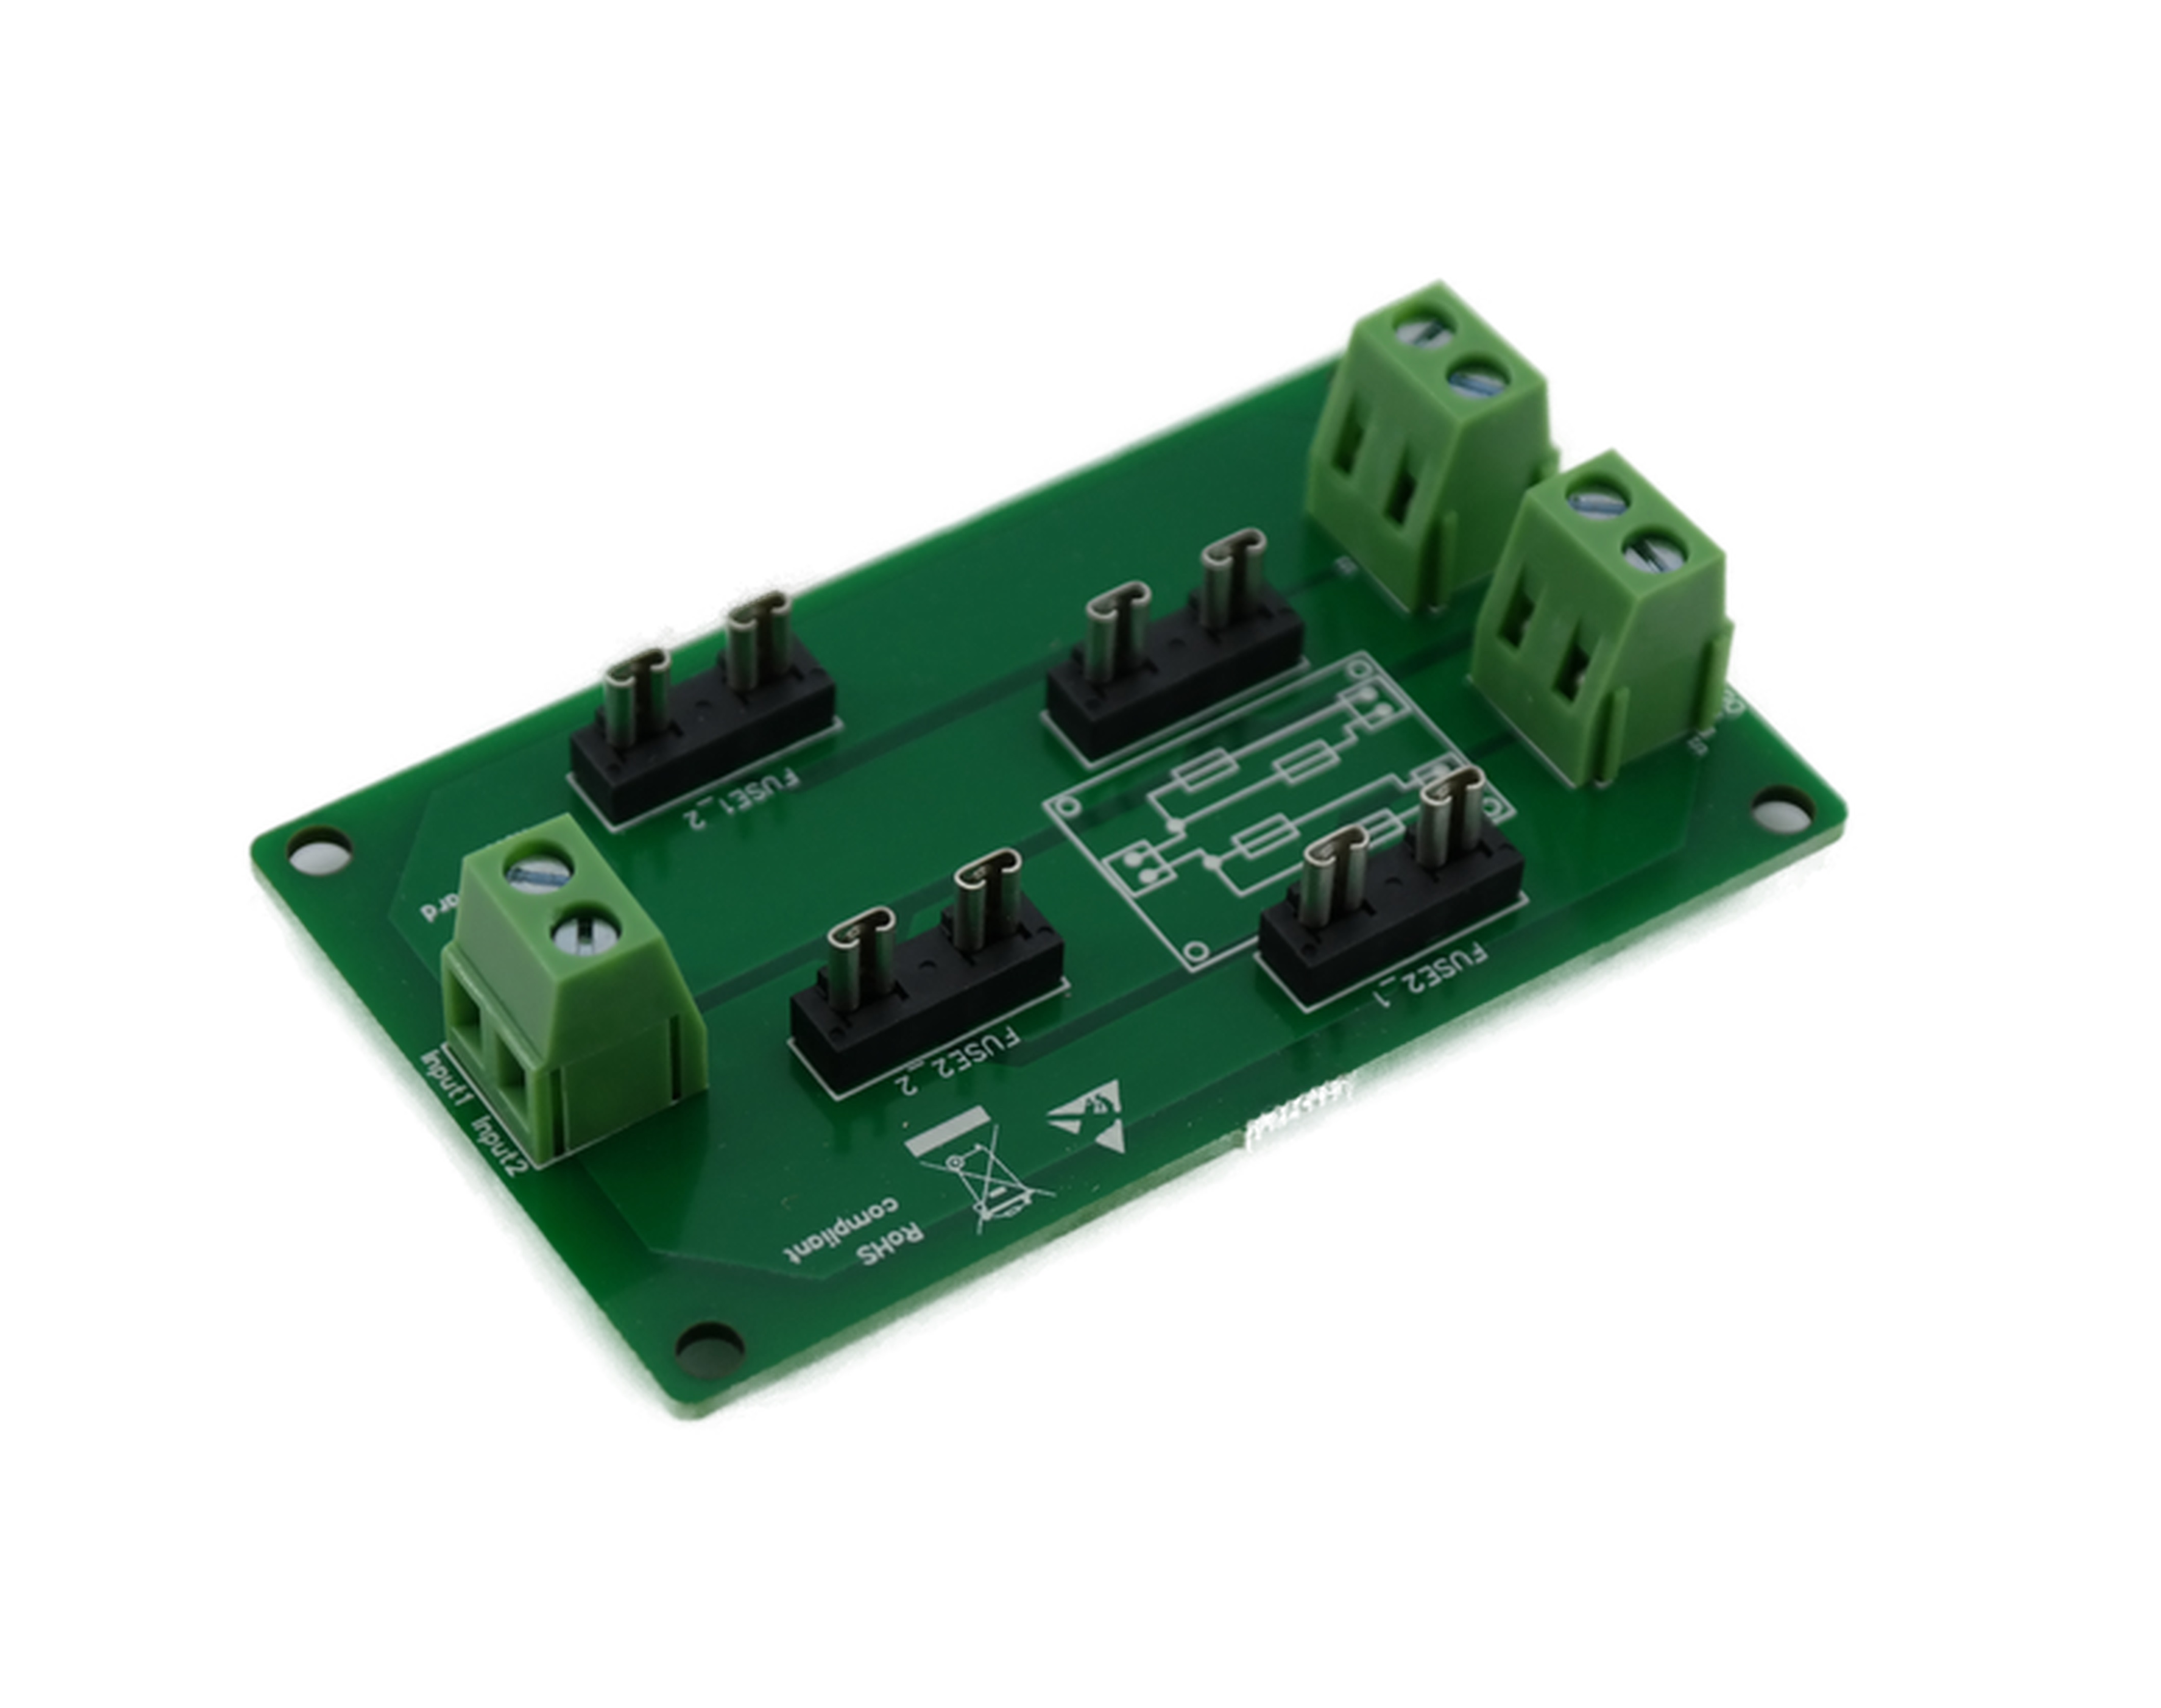 Fuse board for WLED controllers